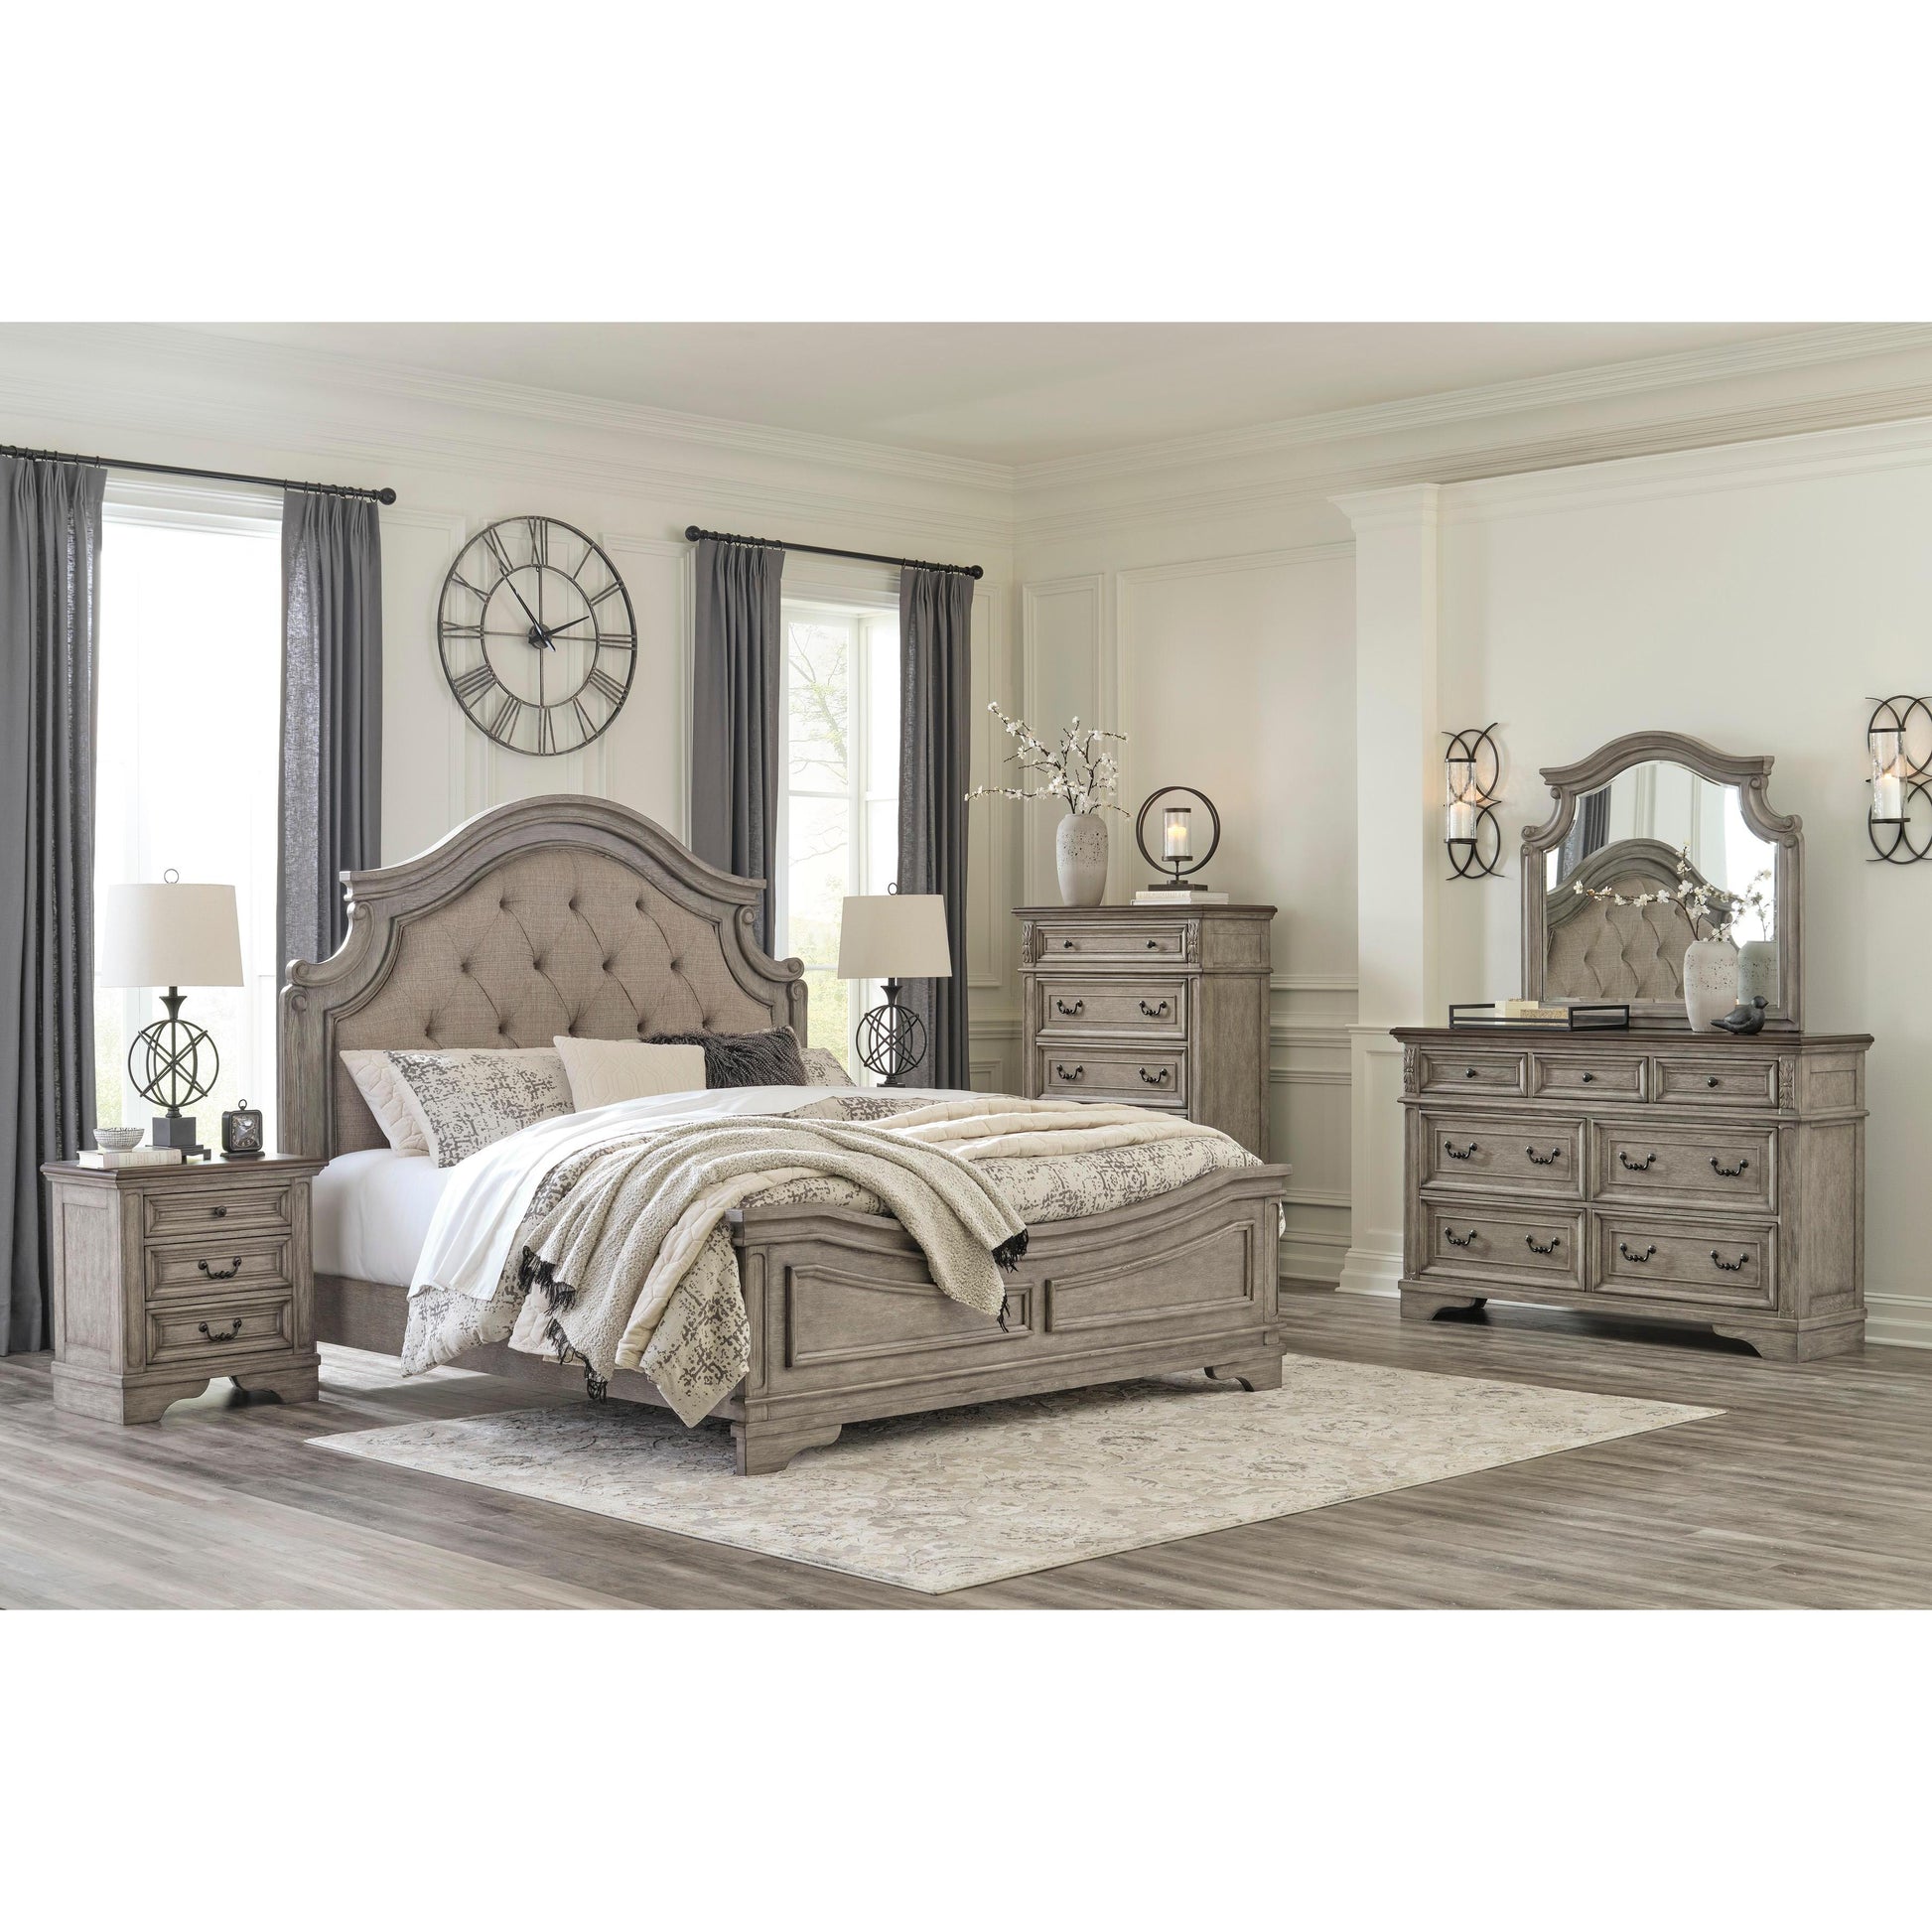 Signature Design by Ashley Lodenbay B751 8 pc Queen Panel Bedroom Set IMAGE 1